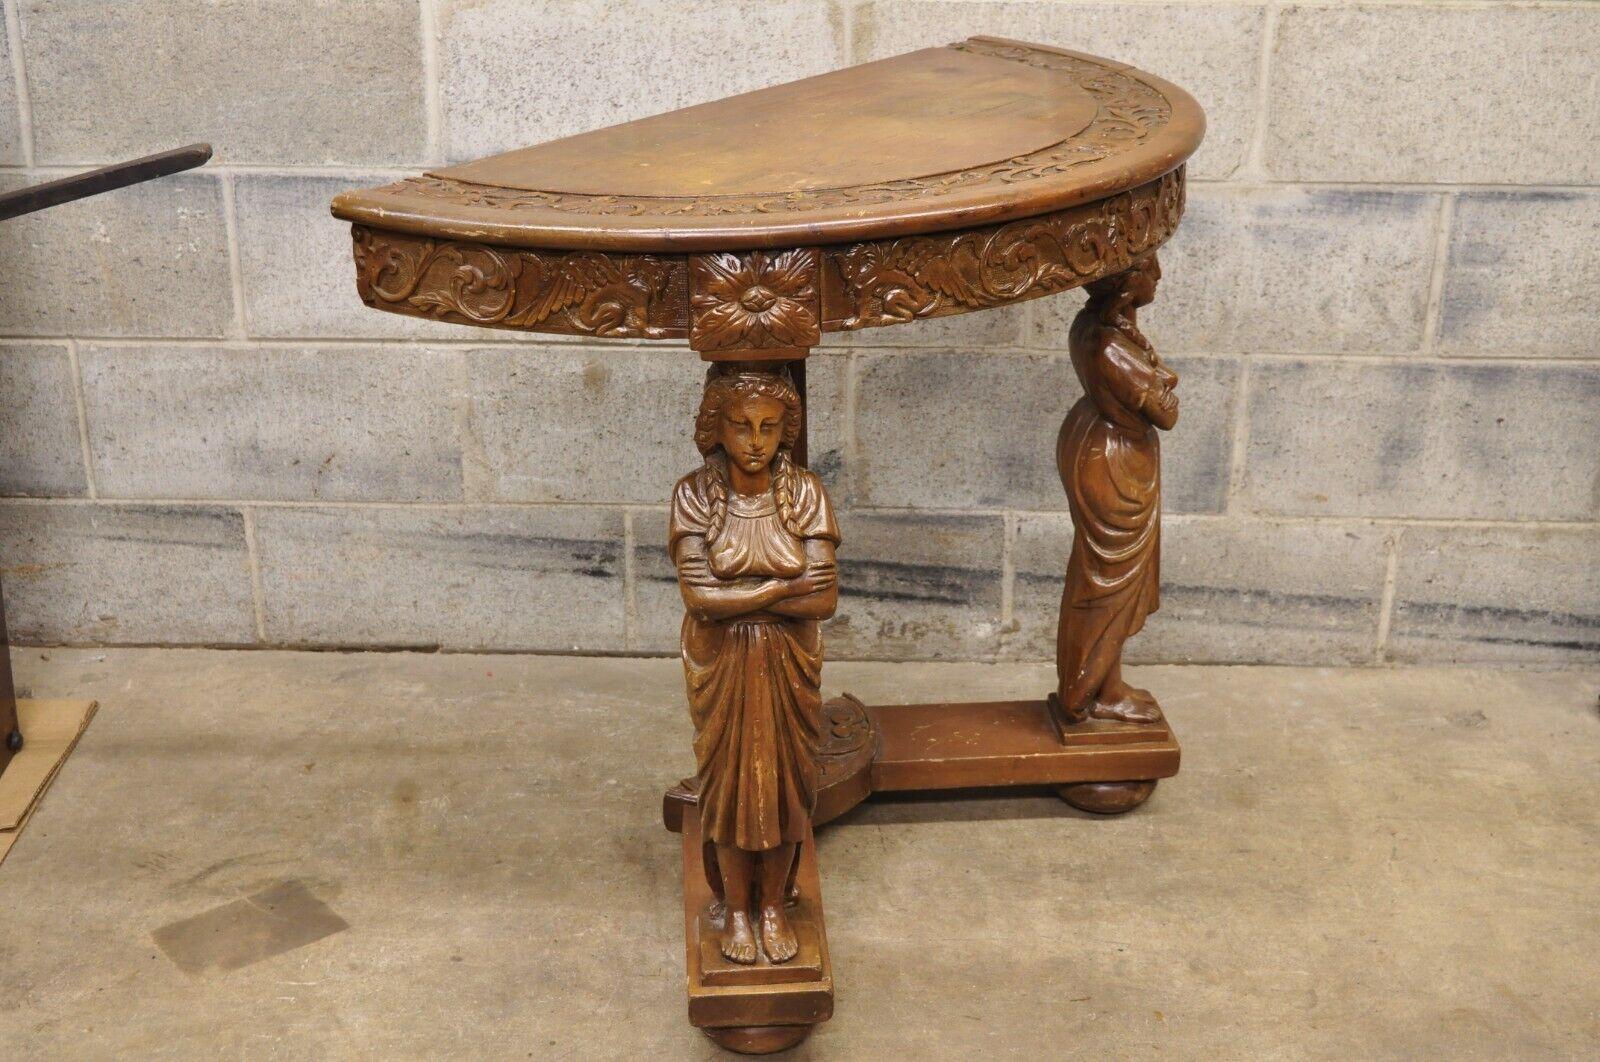 Antique Italian renaissance carved walnut figural half round demilune console table. Item features a full carved female figures, half round demilune top, carved top and skirt, very nice antique item. Circa early 20th century. Measurements: 30